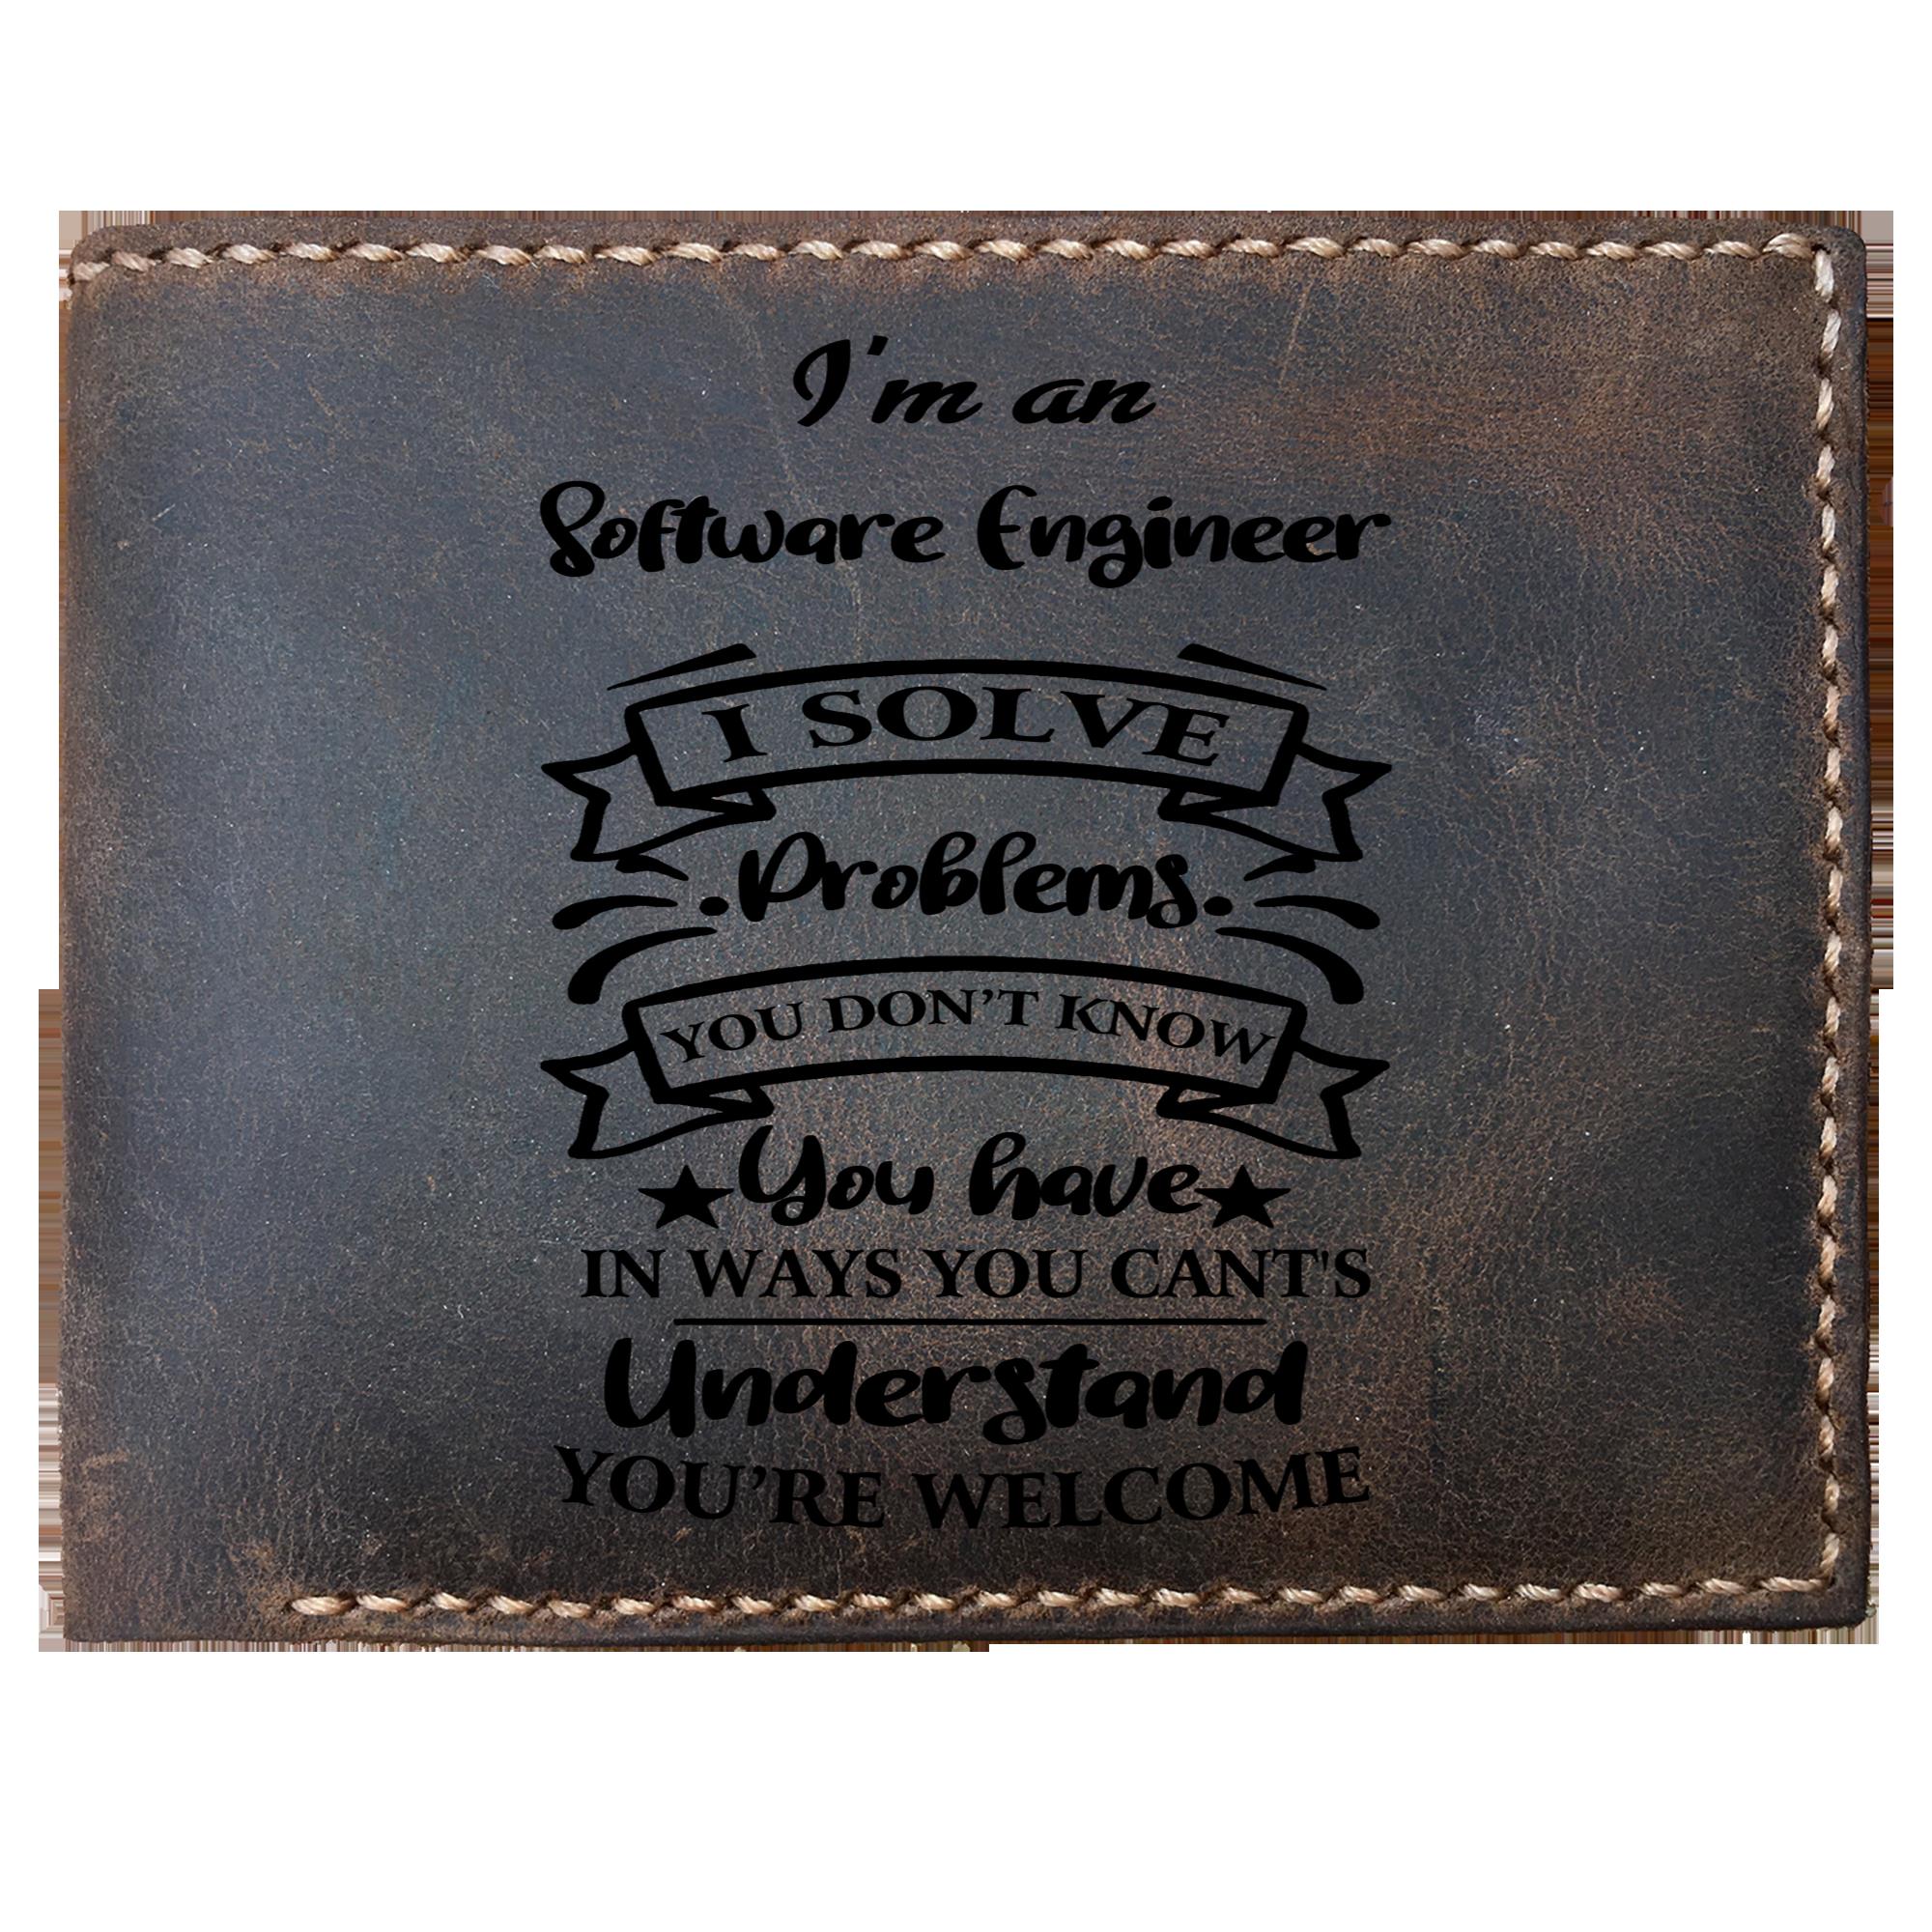 Skitongifts Funny Custom Laser Engraved Bifold Leather Wallet For Men, I'm an Software Engineer Solve Problems, Father's Day Gifts